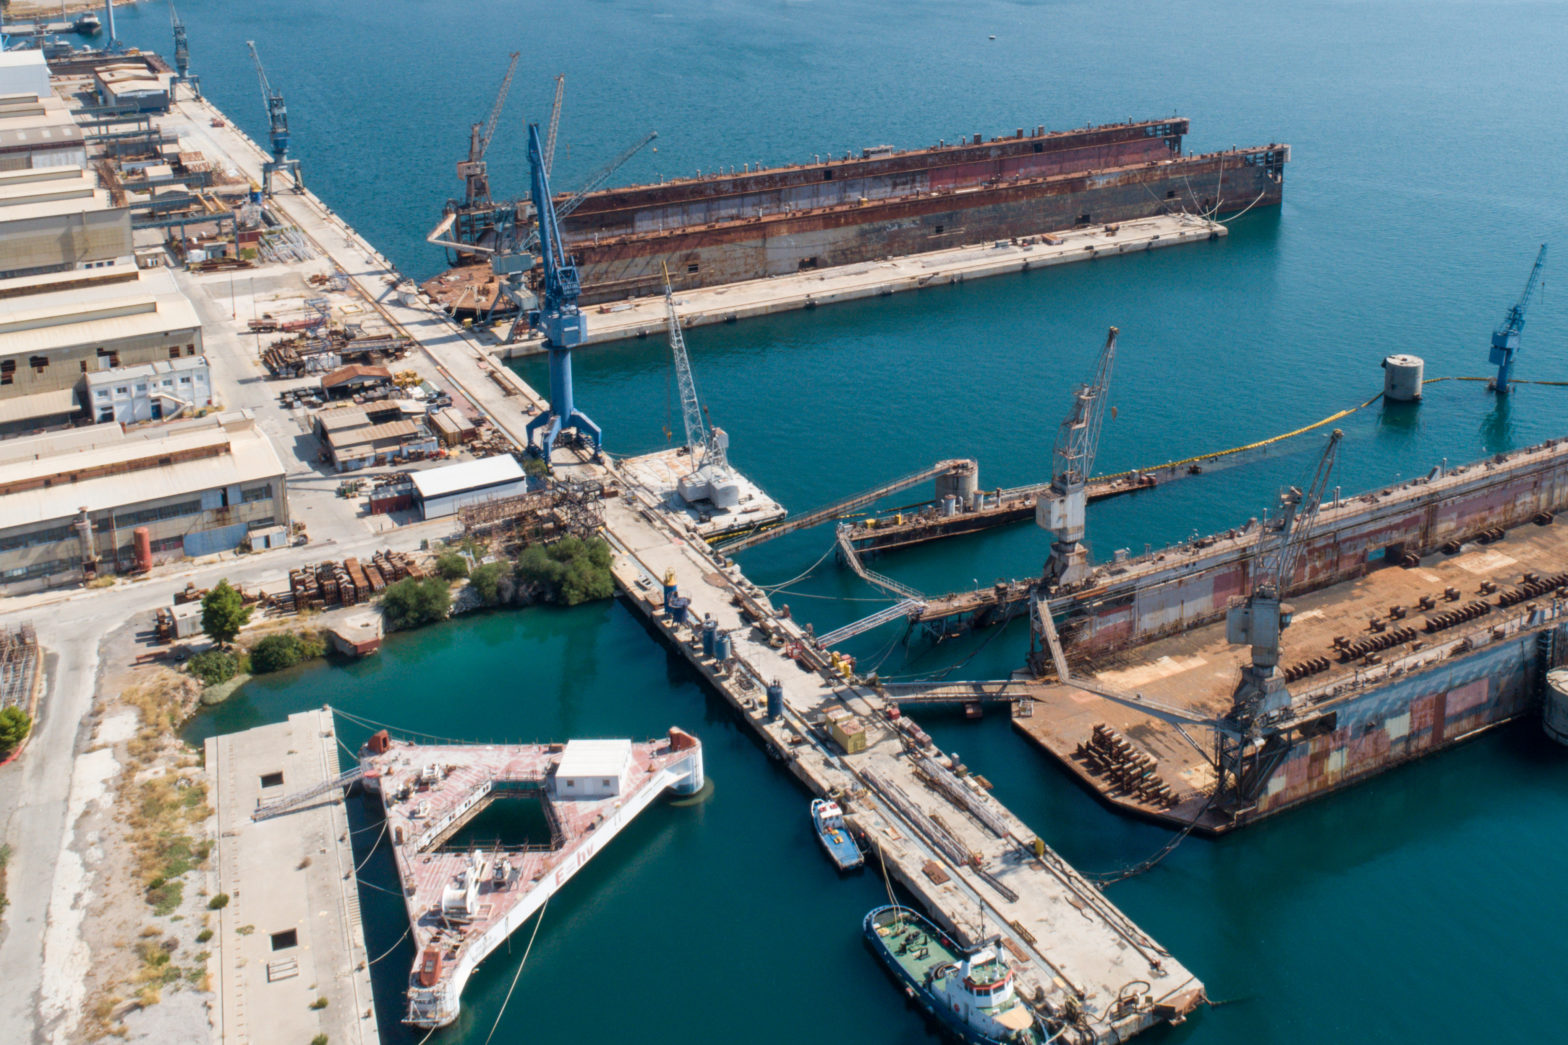 Development Minister at Elefsina Shipyard for Arrival of First Ship in Years